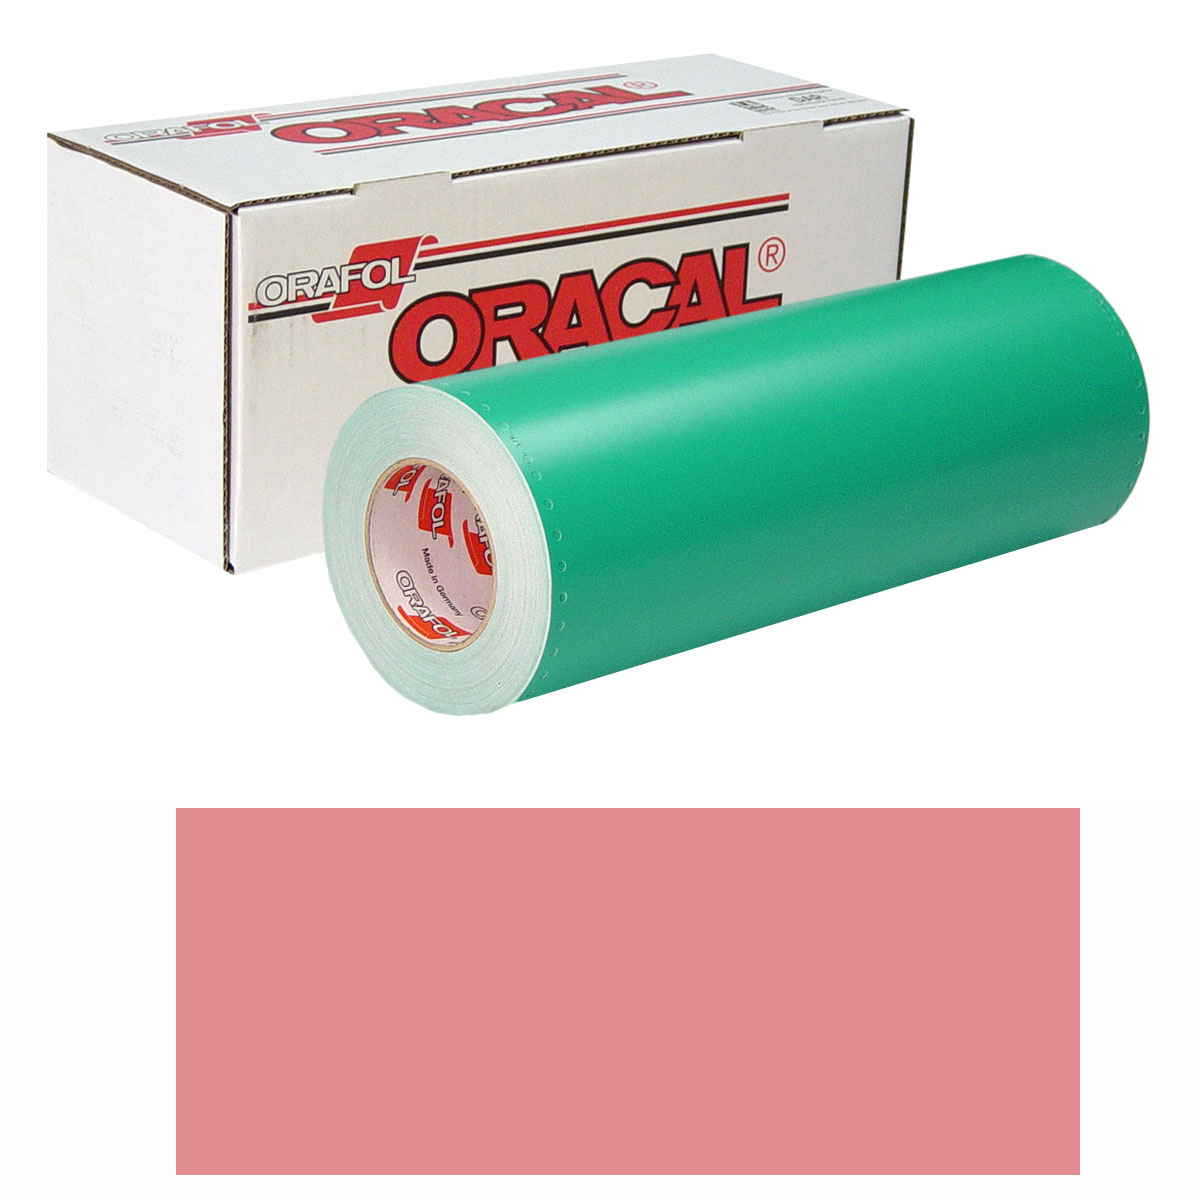 ORACAL 8500 30in X 50yd 085 Pale Pink